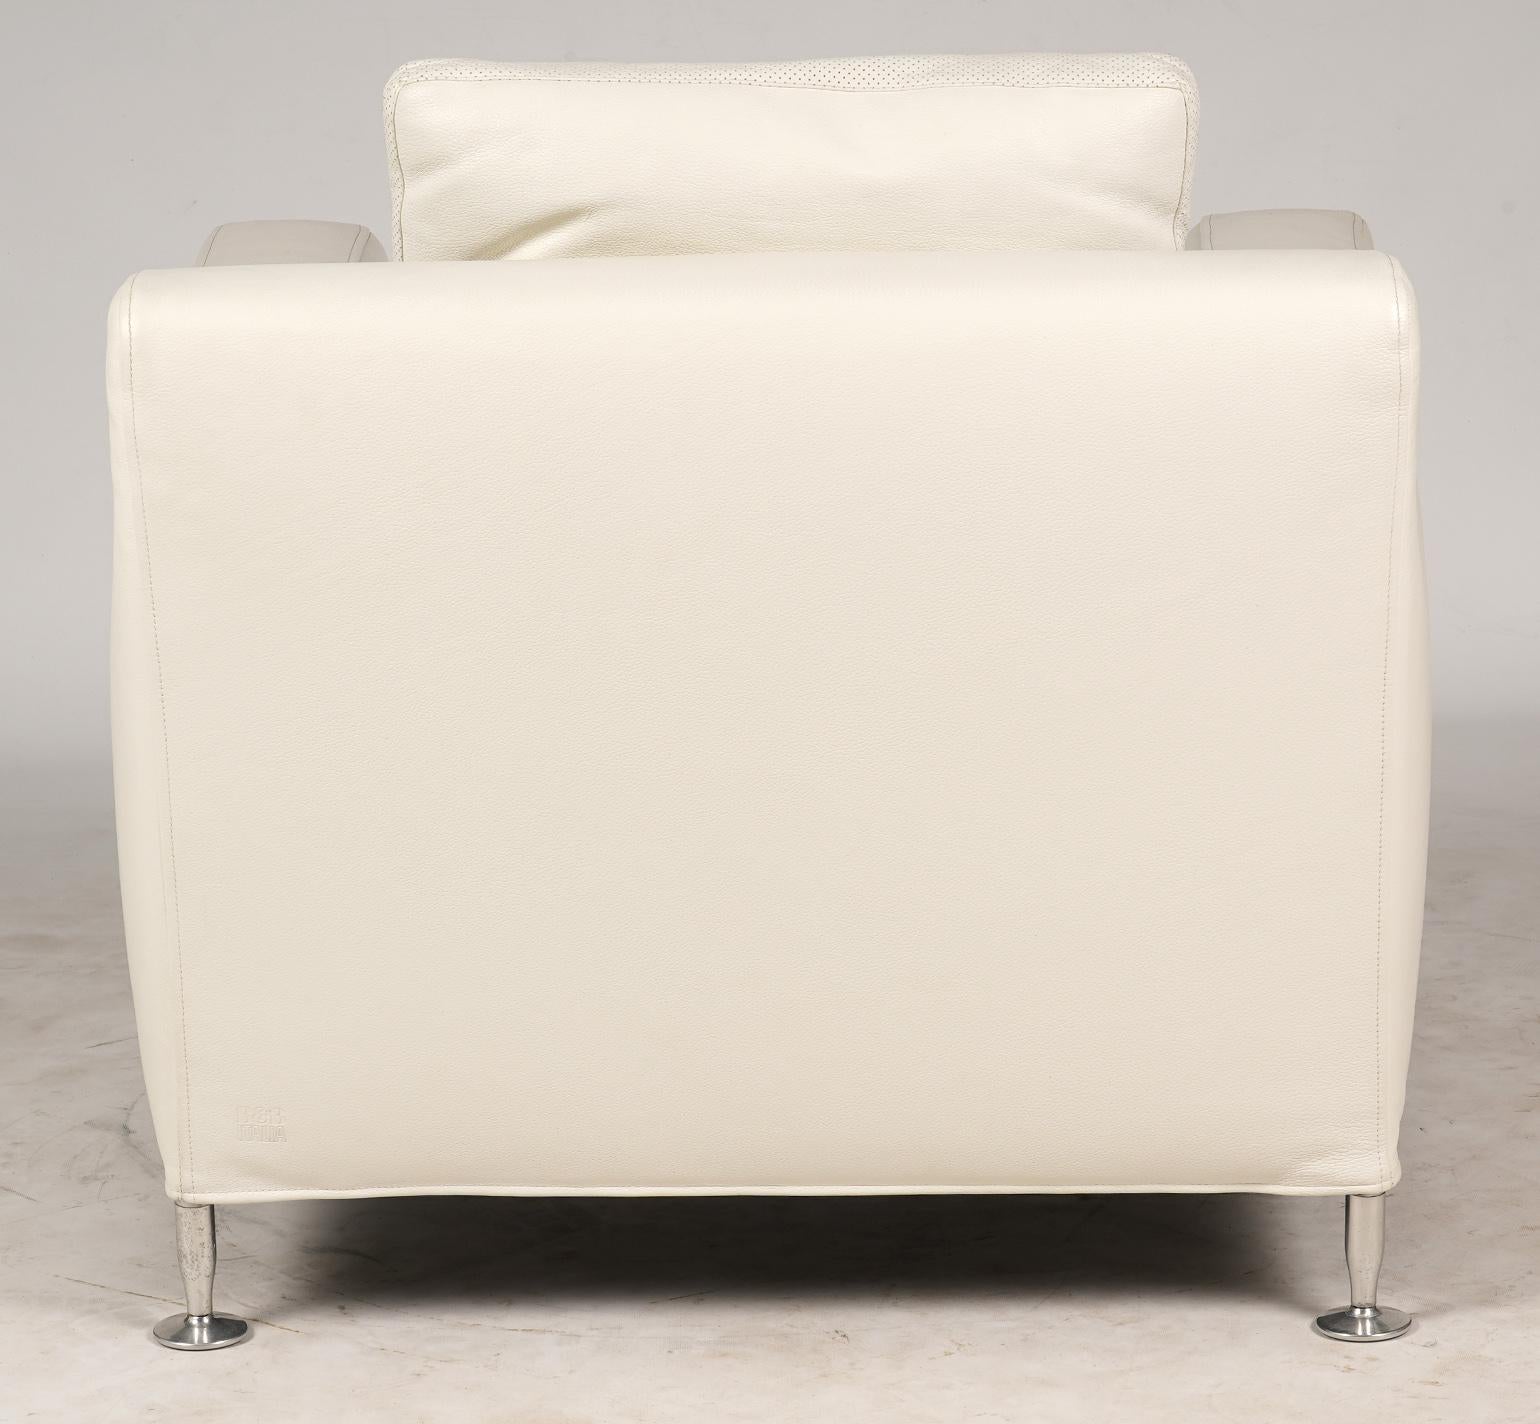 20th Century 'Harry' White Leather Lounge Chair by Antonio Citterio for B&B Italia